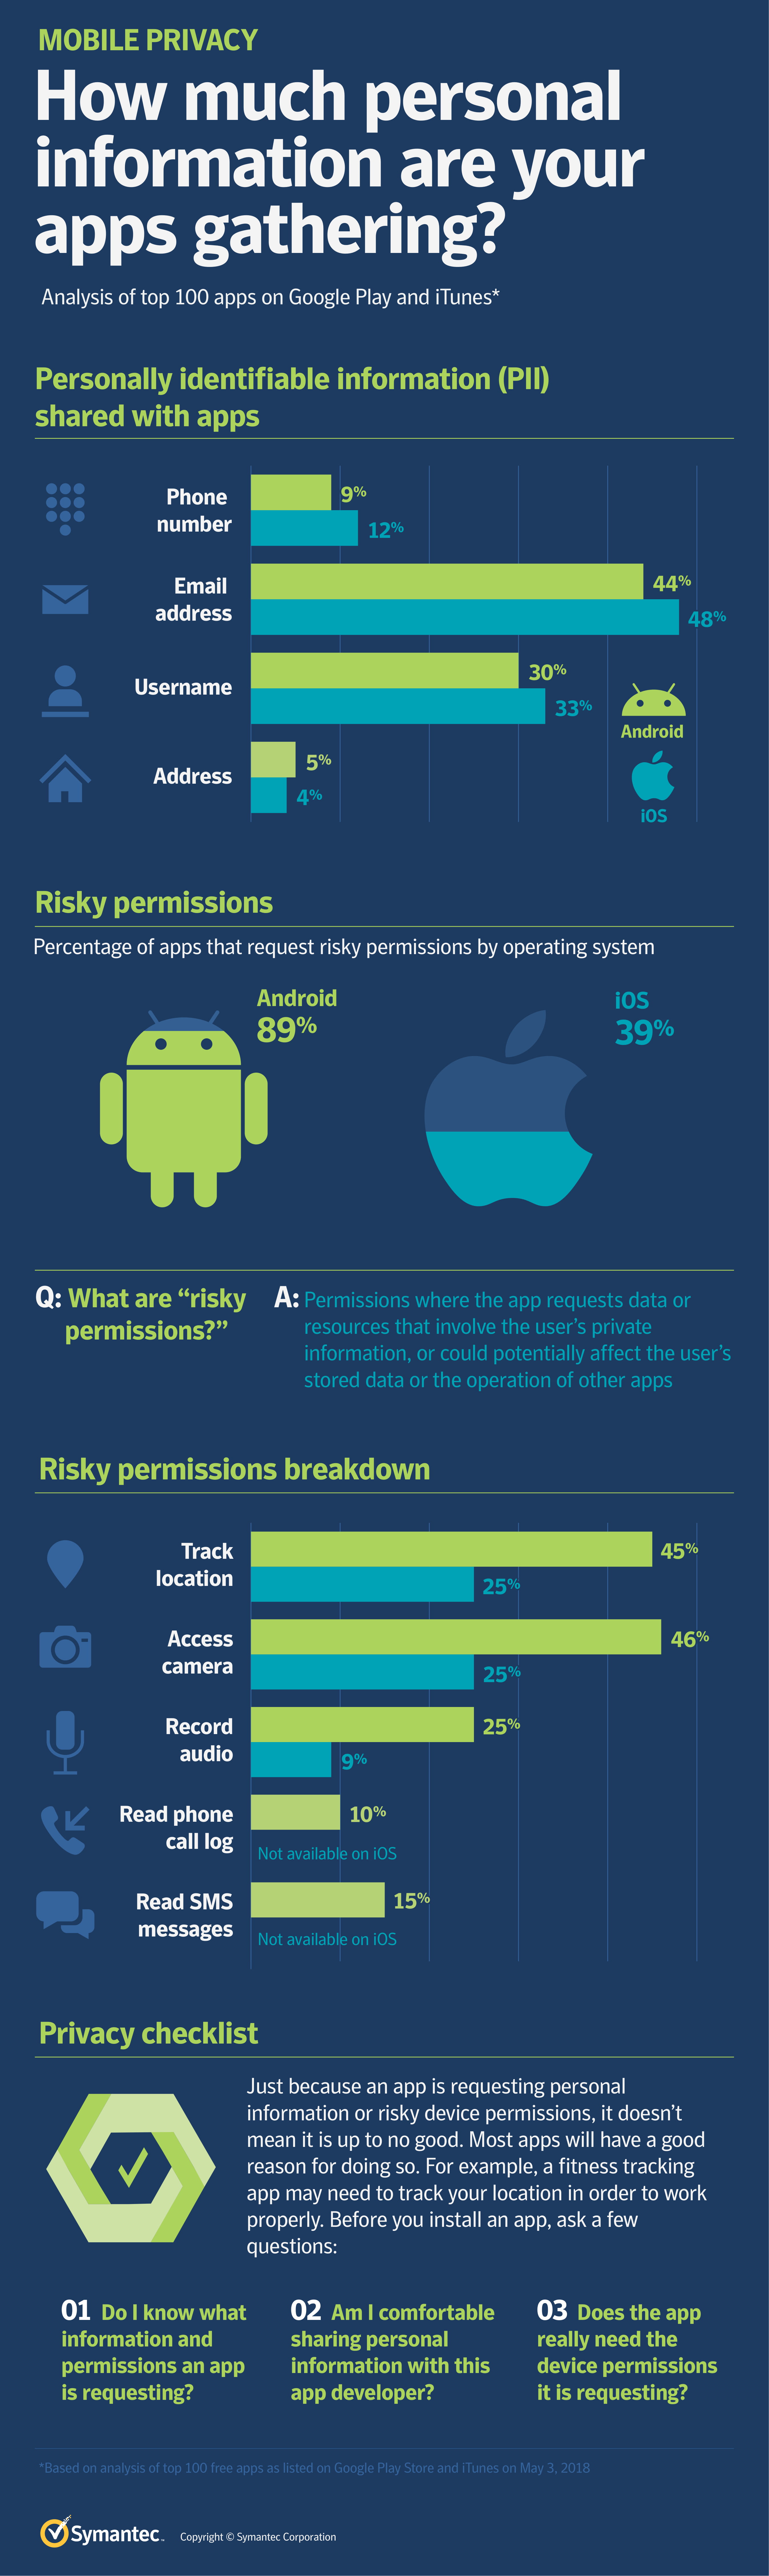 mobile privacy infographic apac